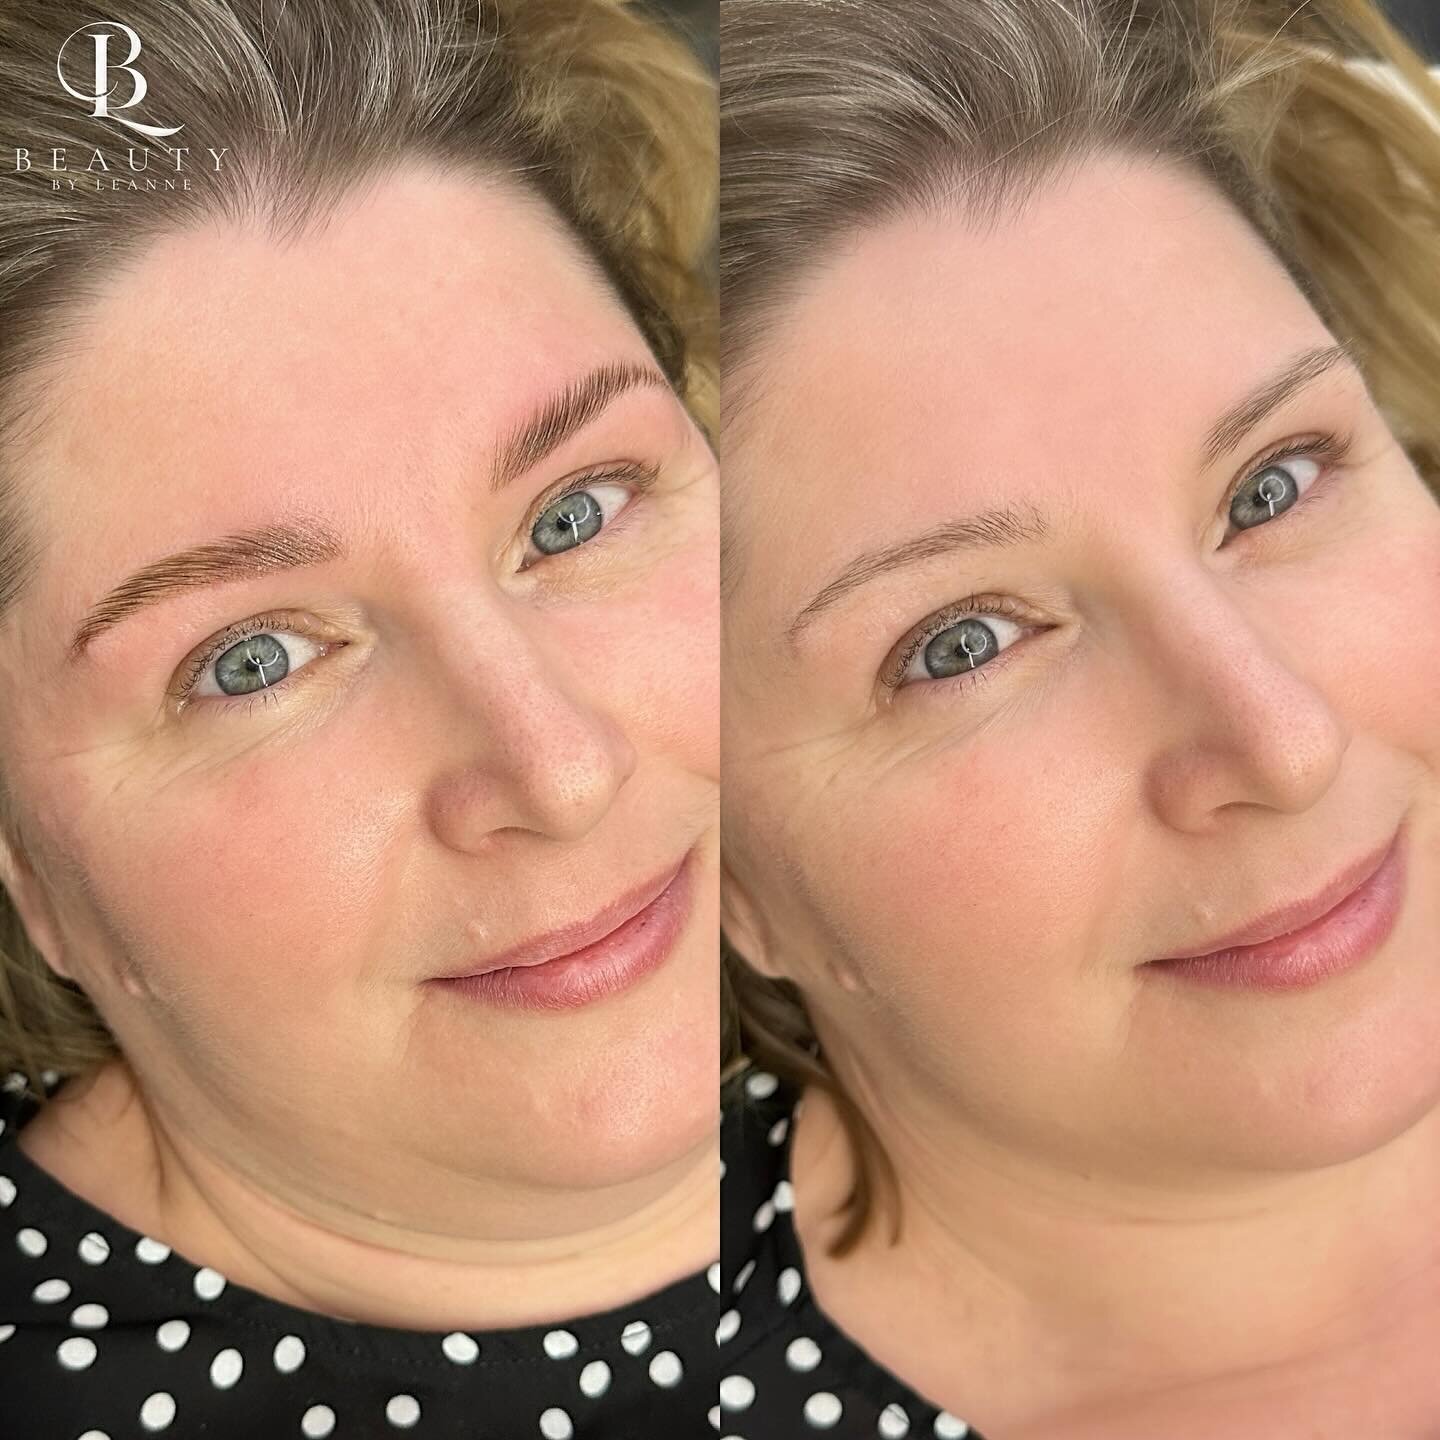 Complete Brow Lamination service (brow lam, sculpt, wax with hybrid tint)

My client was interested in permanent brows but wanted to try something temporary first. She was pleasantly surprised with how full her brows were after being laminated 🔥🔥

